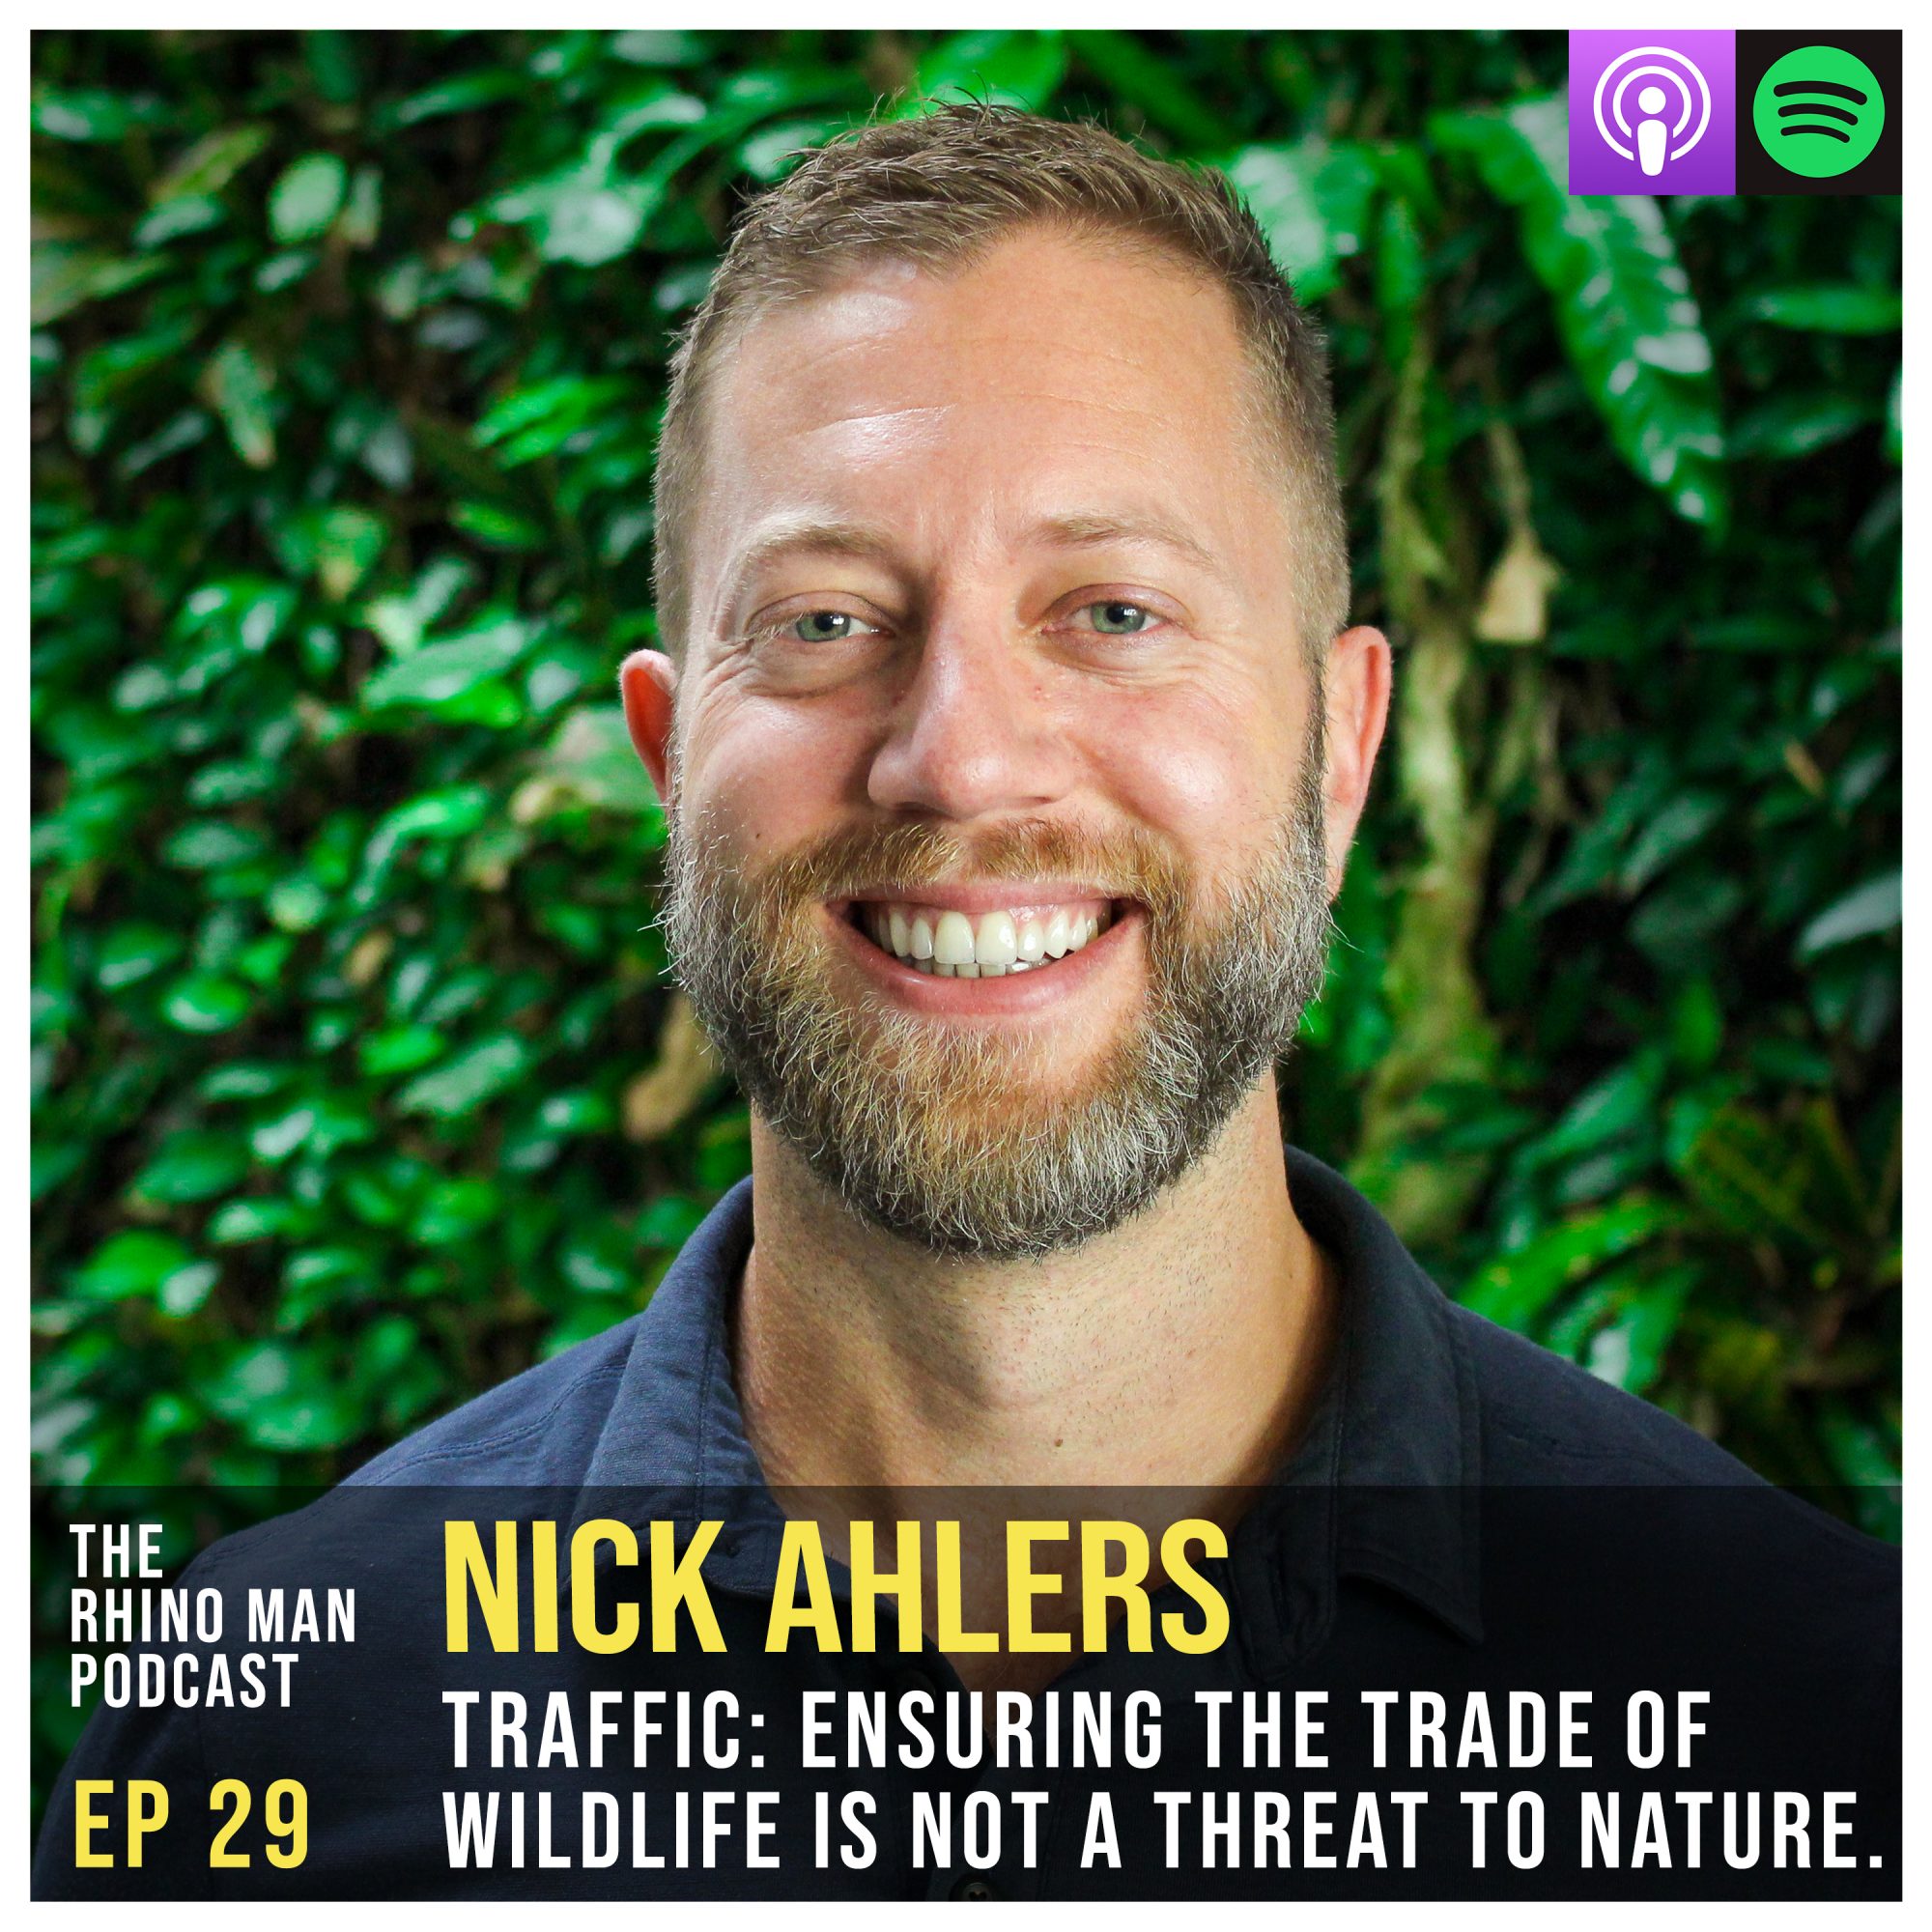 Ep 29: Nick Ahlers – TRAFFIC: Ensuring the trade of wildlife is not a threat to nature.